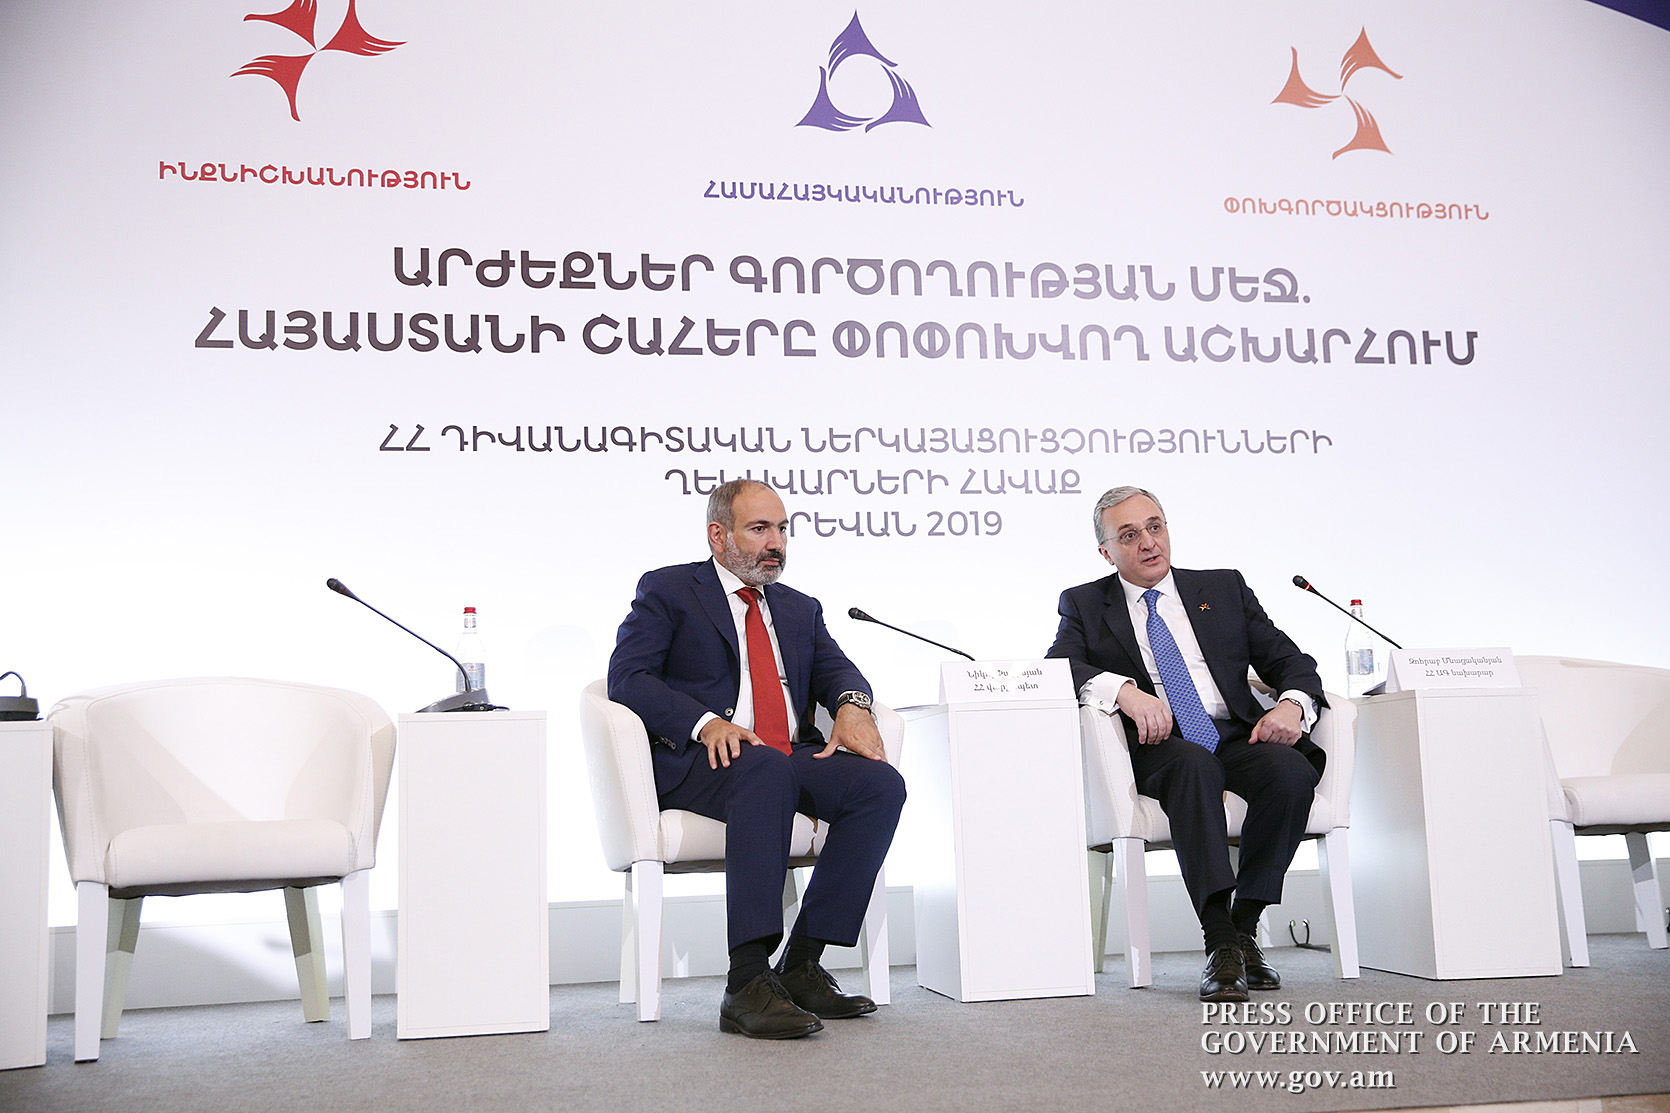 “Democracy should be the number one visiting card of Armenia’s foreign policy” – PM attends meeting with heads of MFA’s central apparatus and diplomatic missions